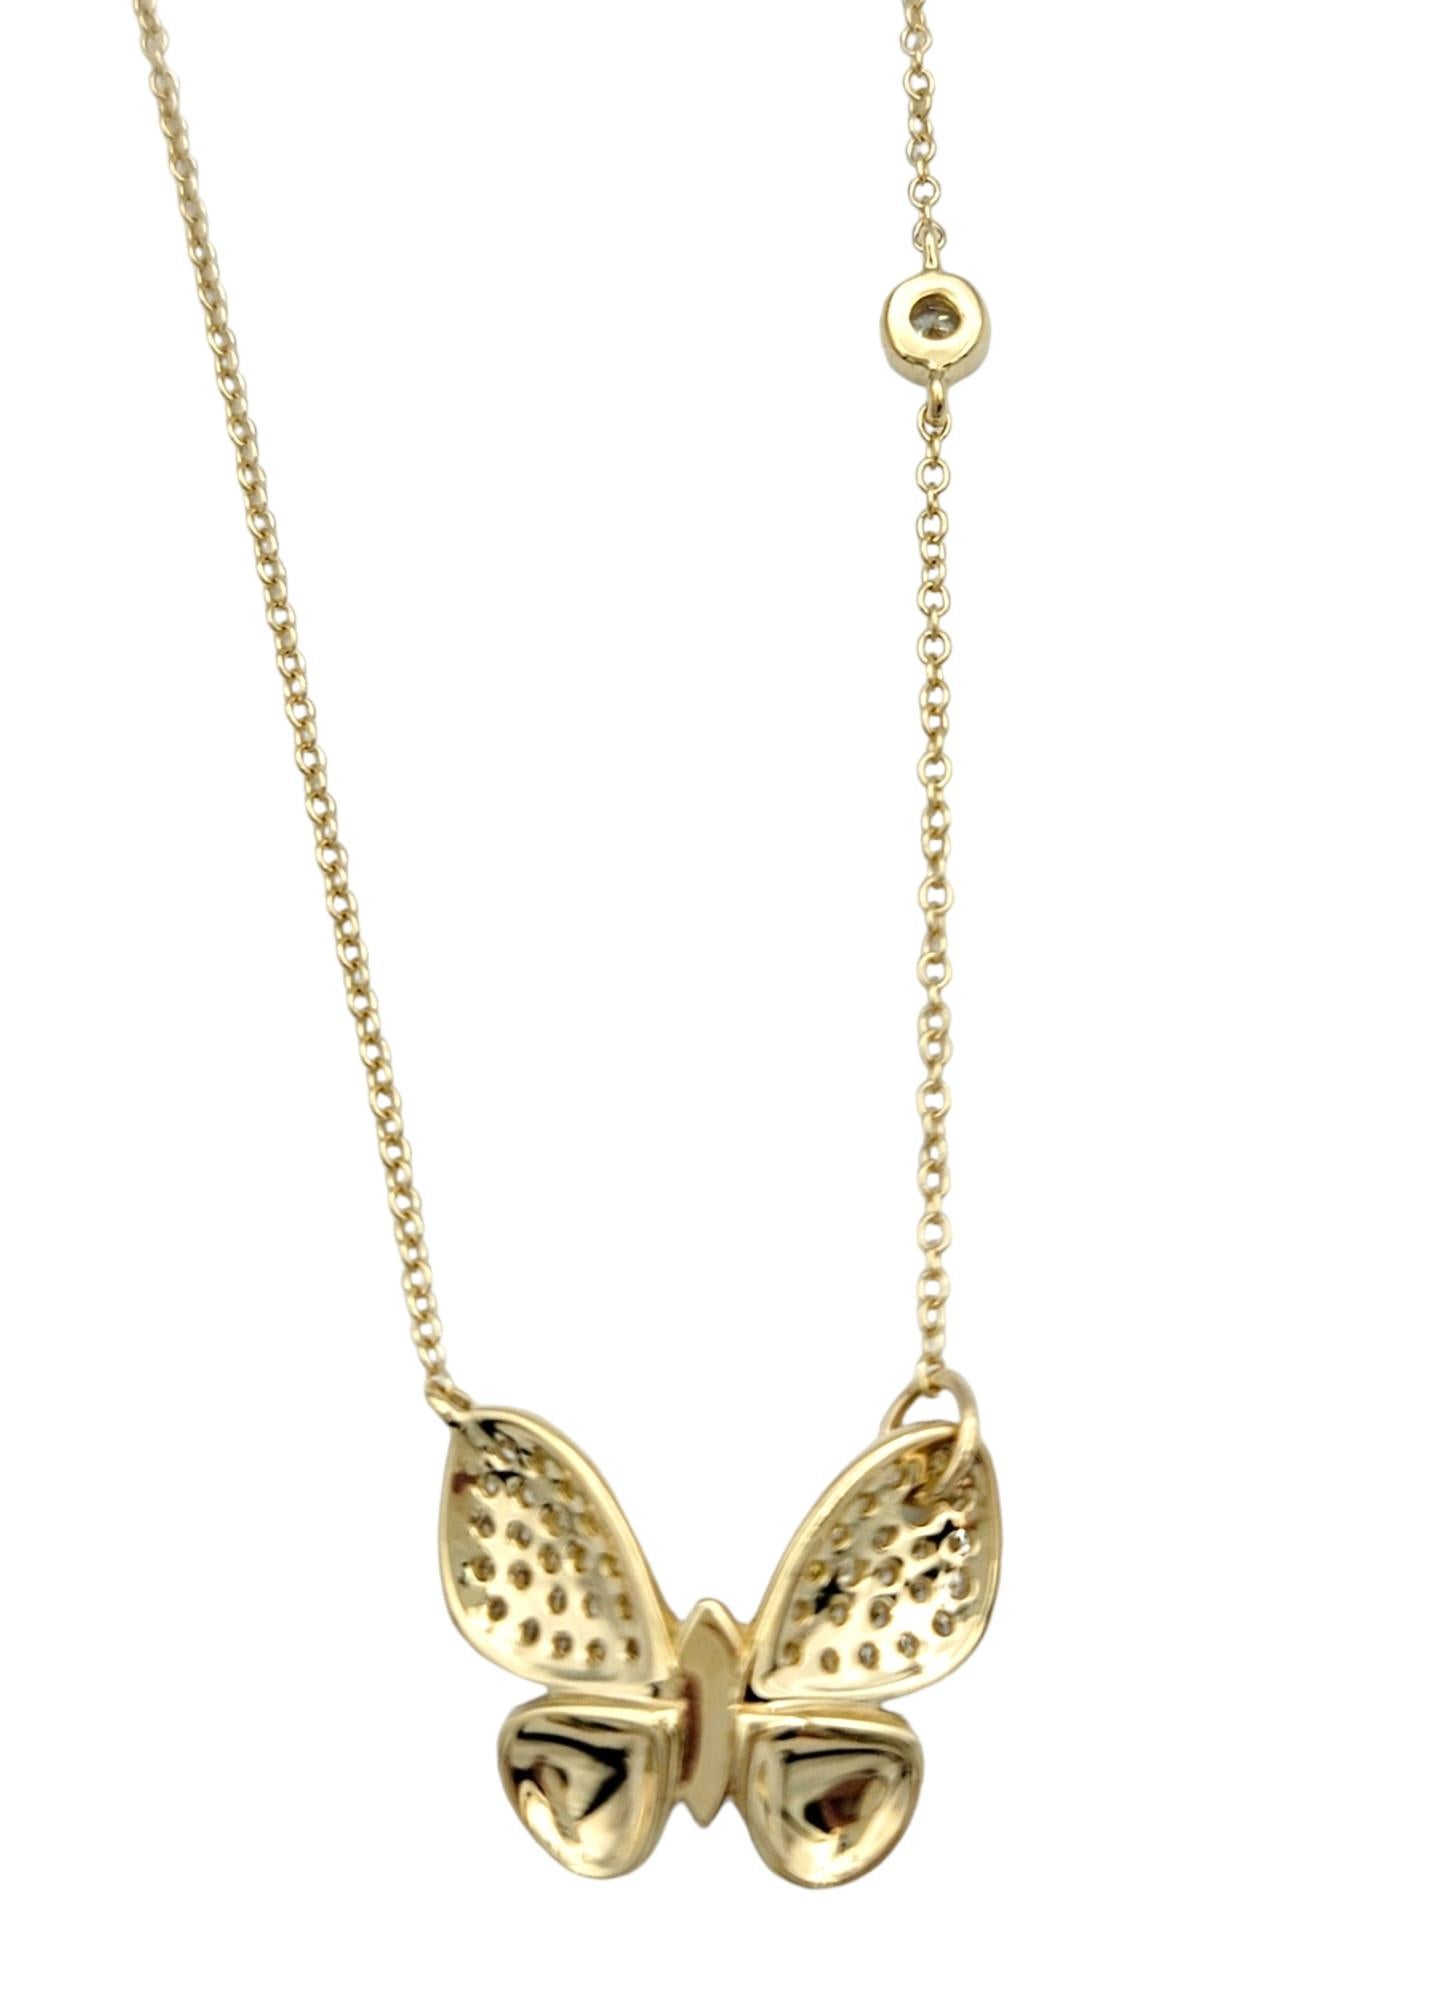 Effy Pavé Diamond Butterfly Pendant Necklace Set in 14 Karat Yellow Gold In Good Condition For Sale In Scottsdale, AZ